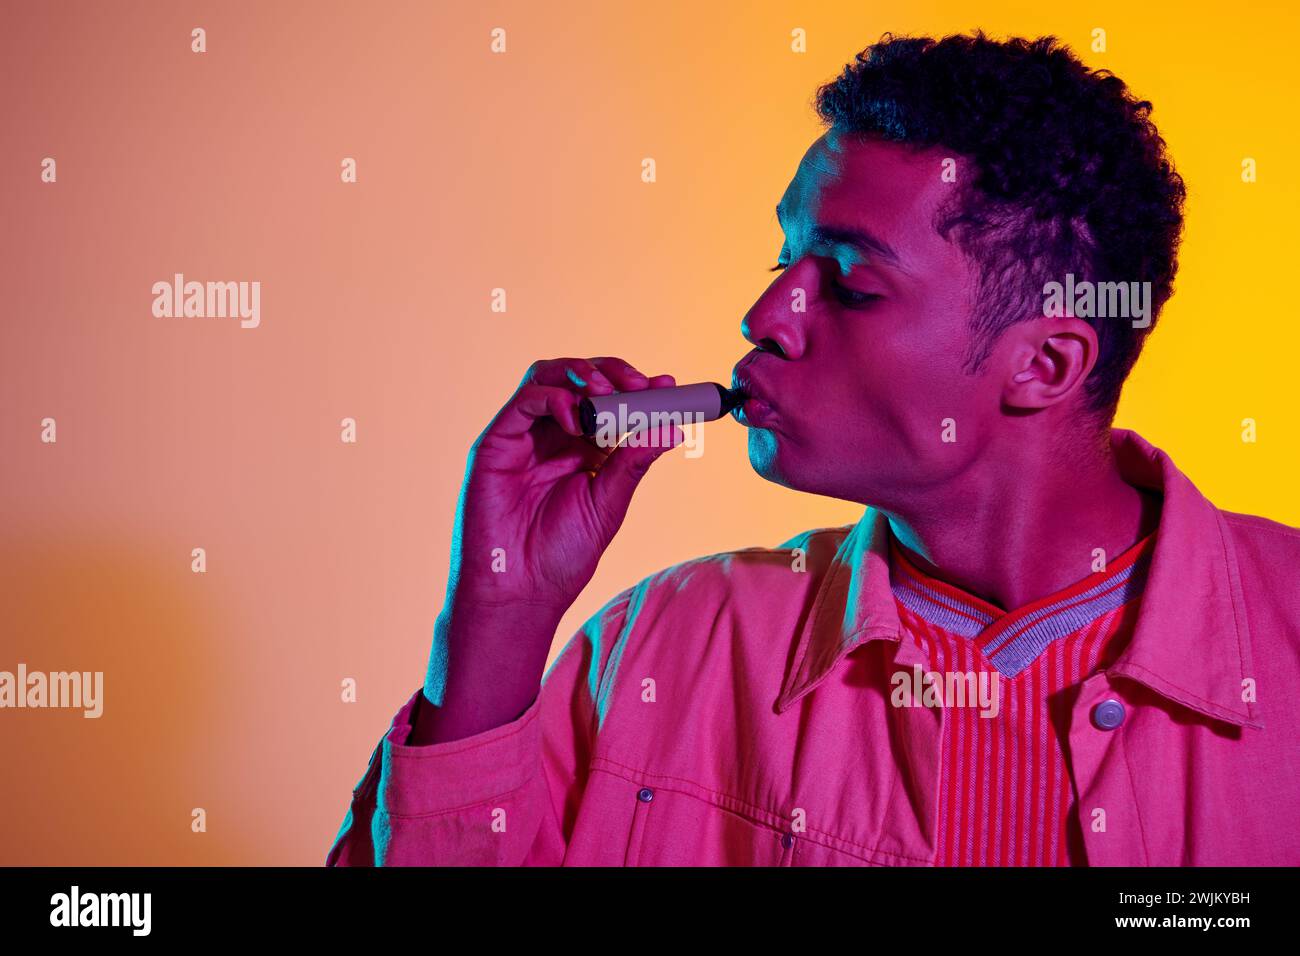 african american man with electronic cigarette against colorful backdrop with lighting, vaping Stock Photo